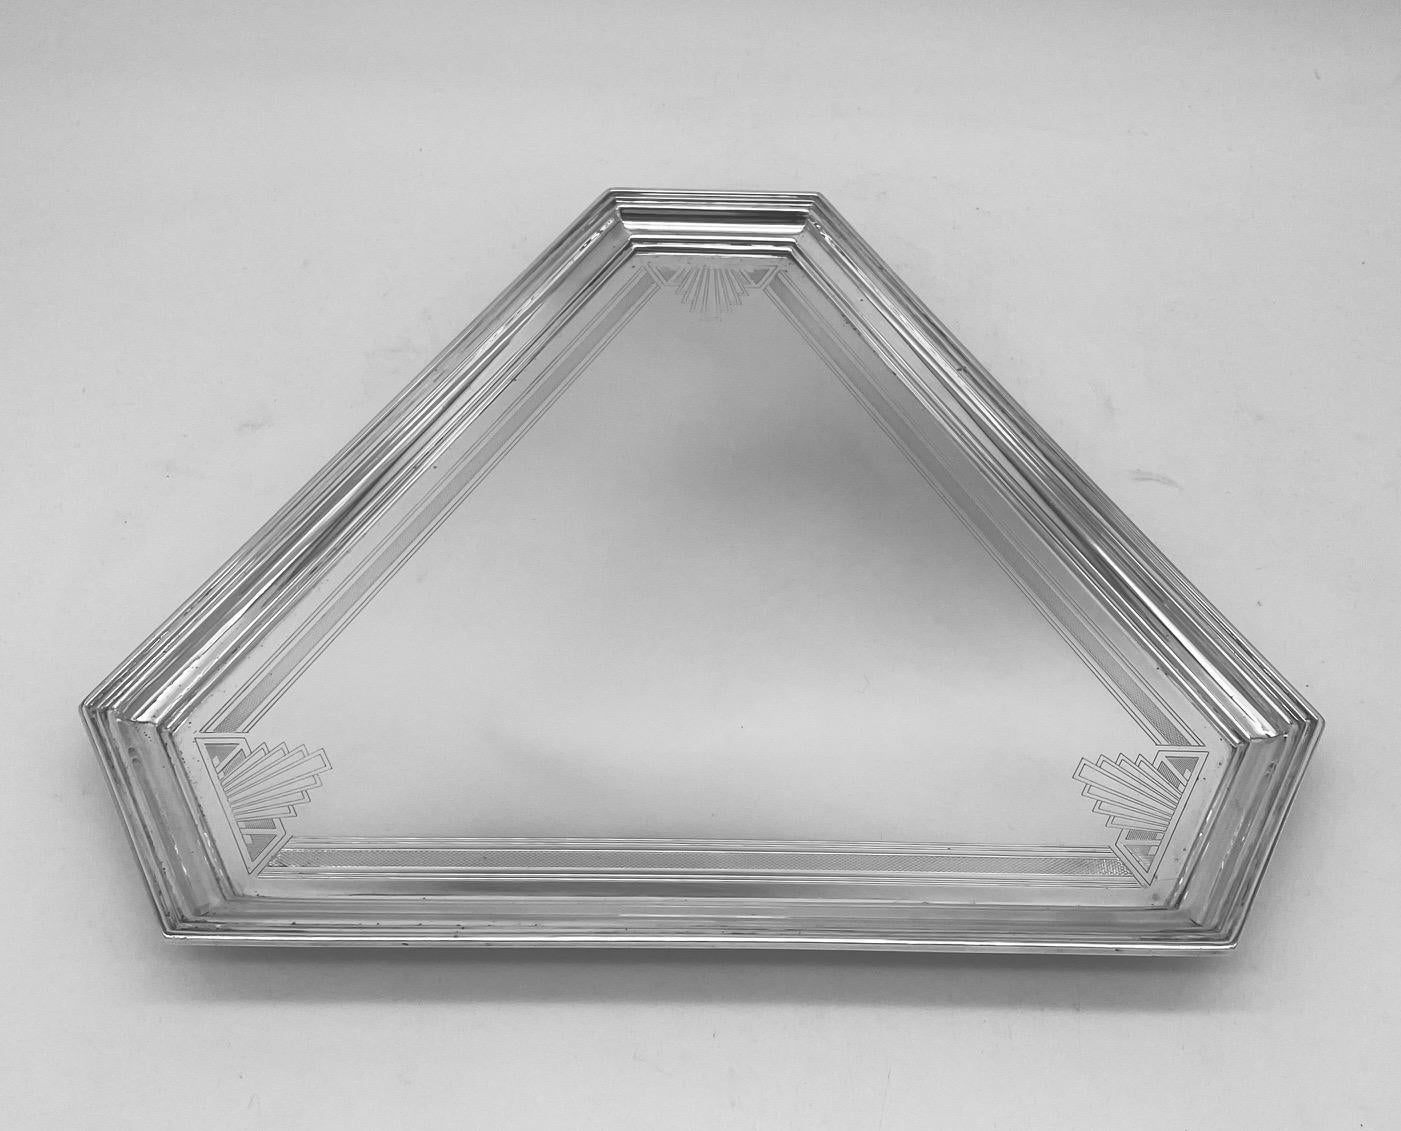 This is a lovely Art Deco sterling silver tray or salver, of canted-corner triangular form and with geometric engraving. The salver, which stands on three feet, is perfect for serving drinks or as a display piece in a 1930s setting. 
It is